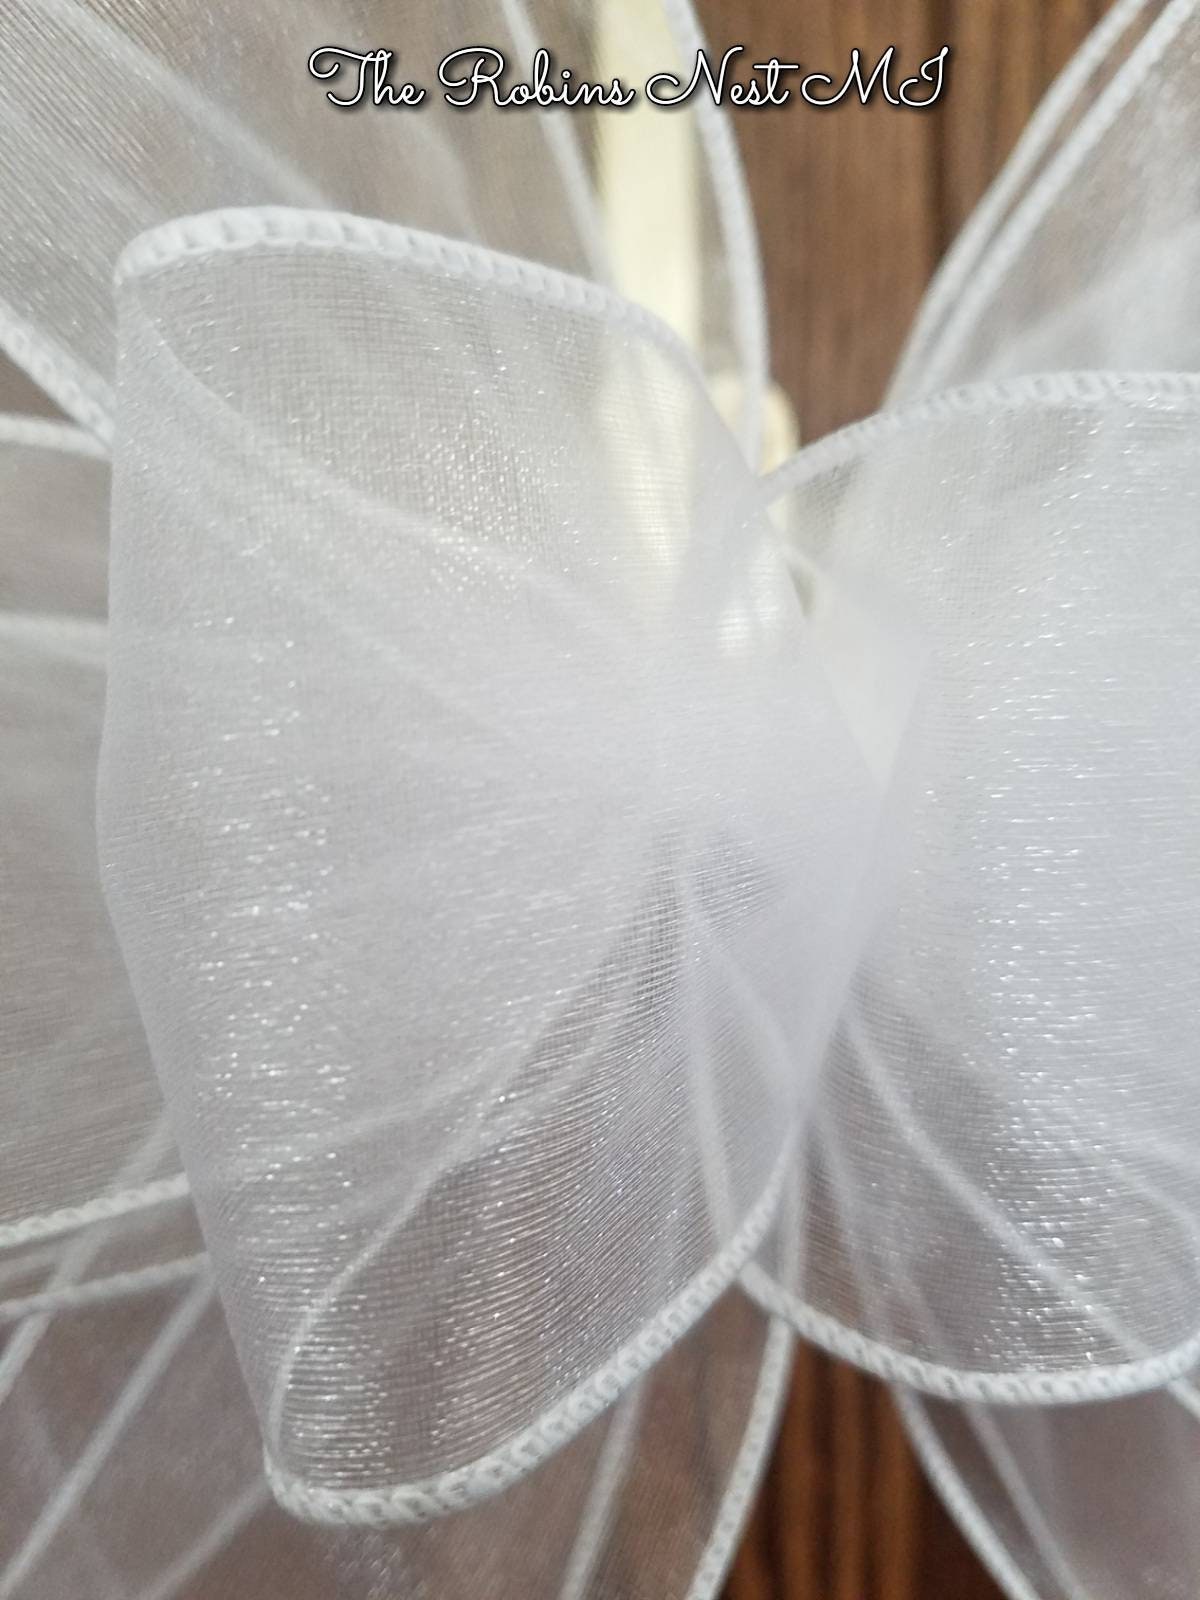 Wedding bow for pews or arch. 10” organza and tulle bow. Pink and white